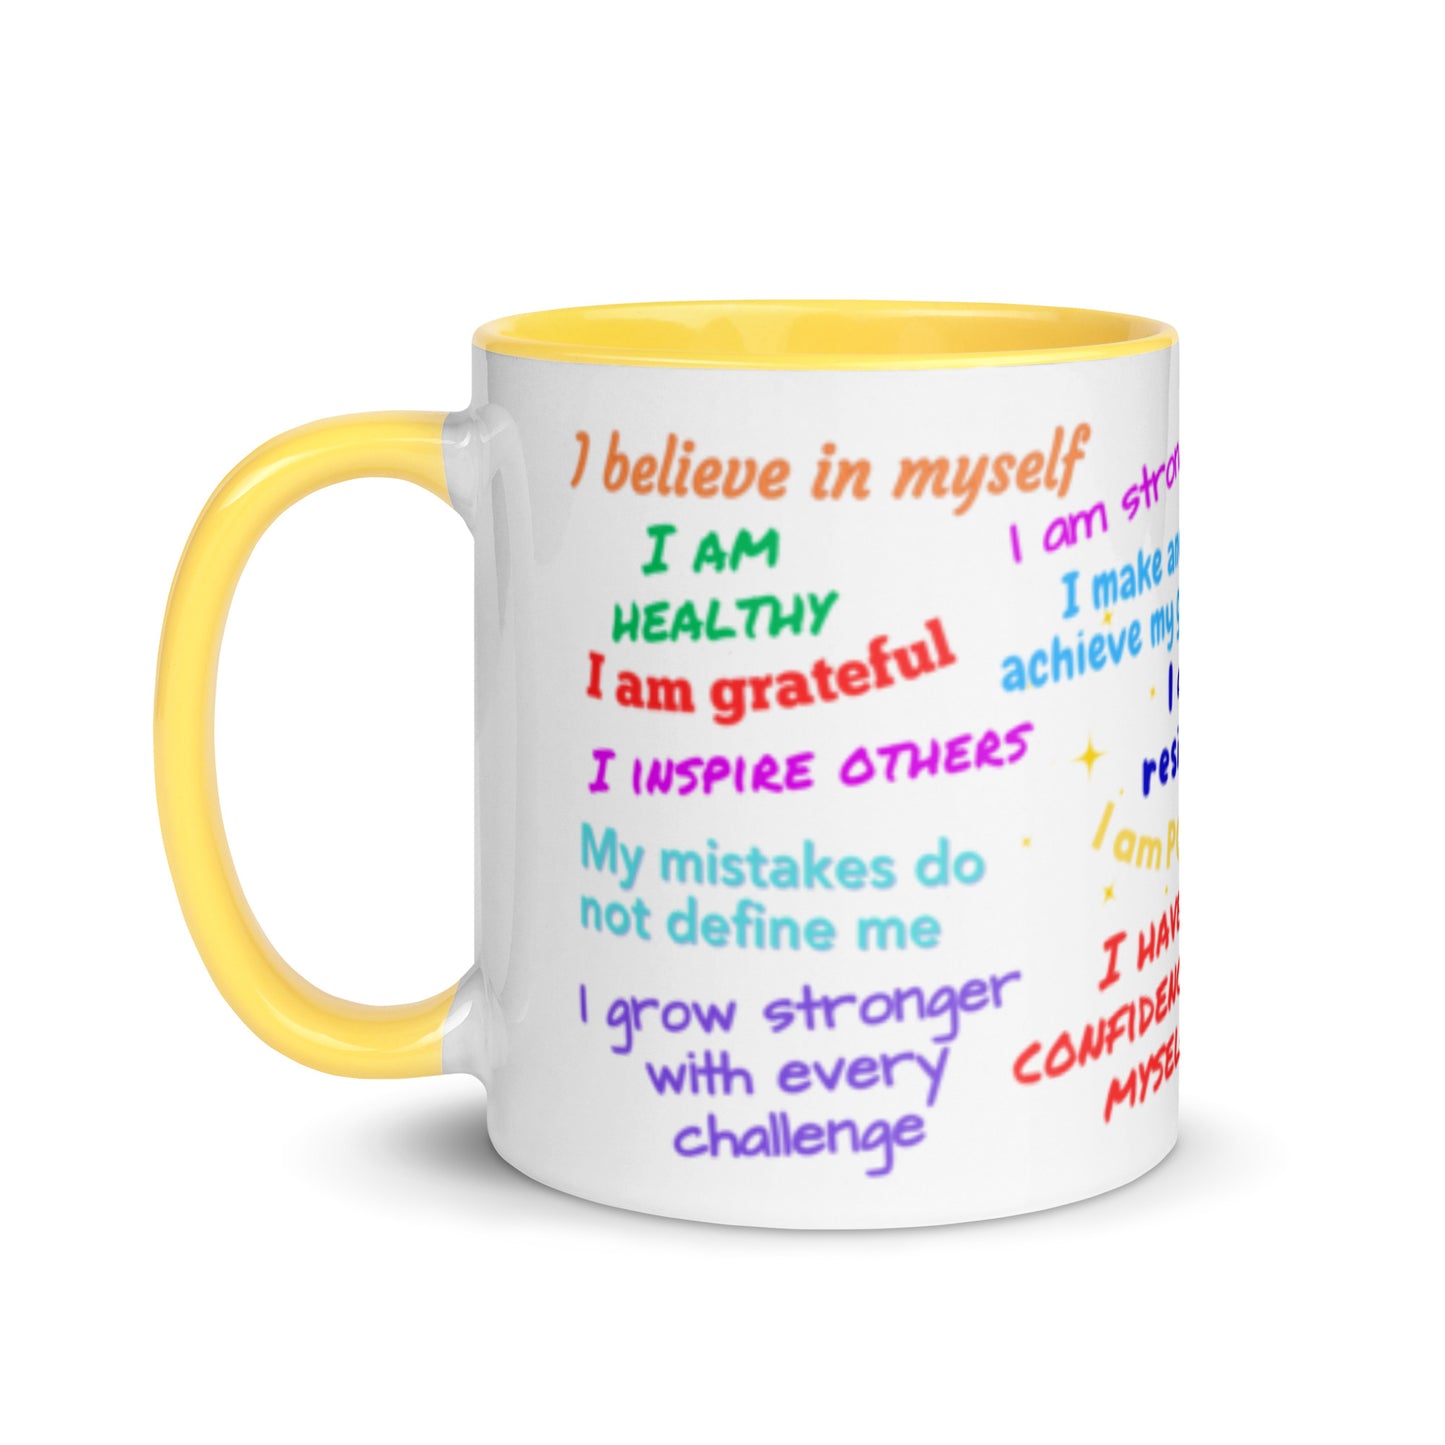 Mug with Color Inside - Daily Affirmations